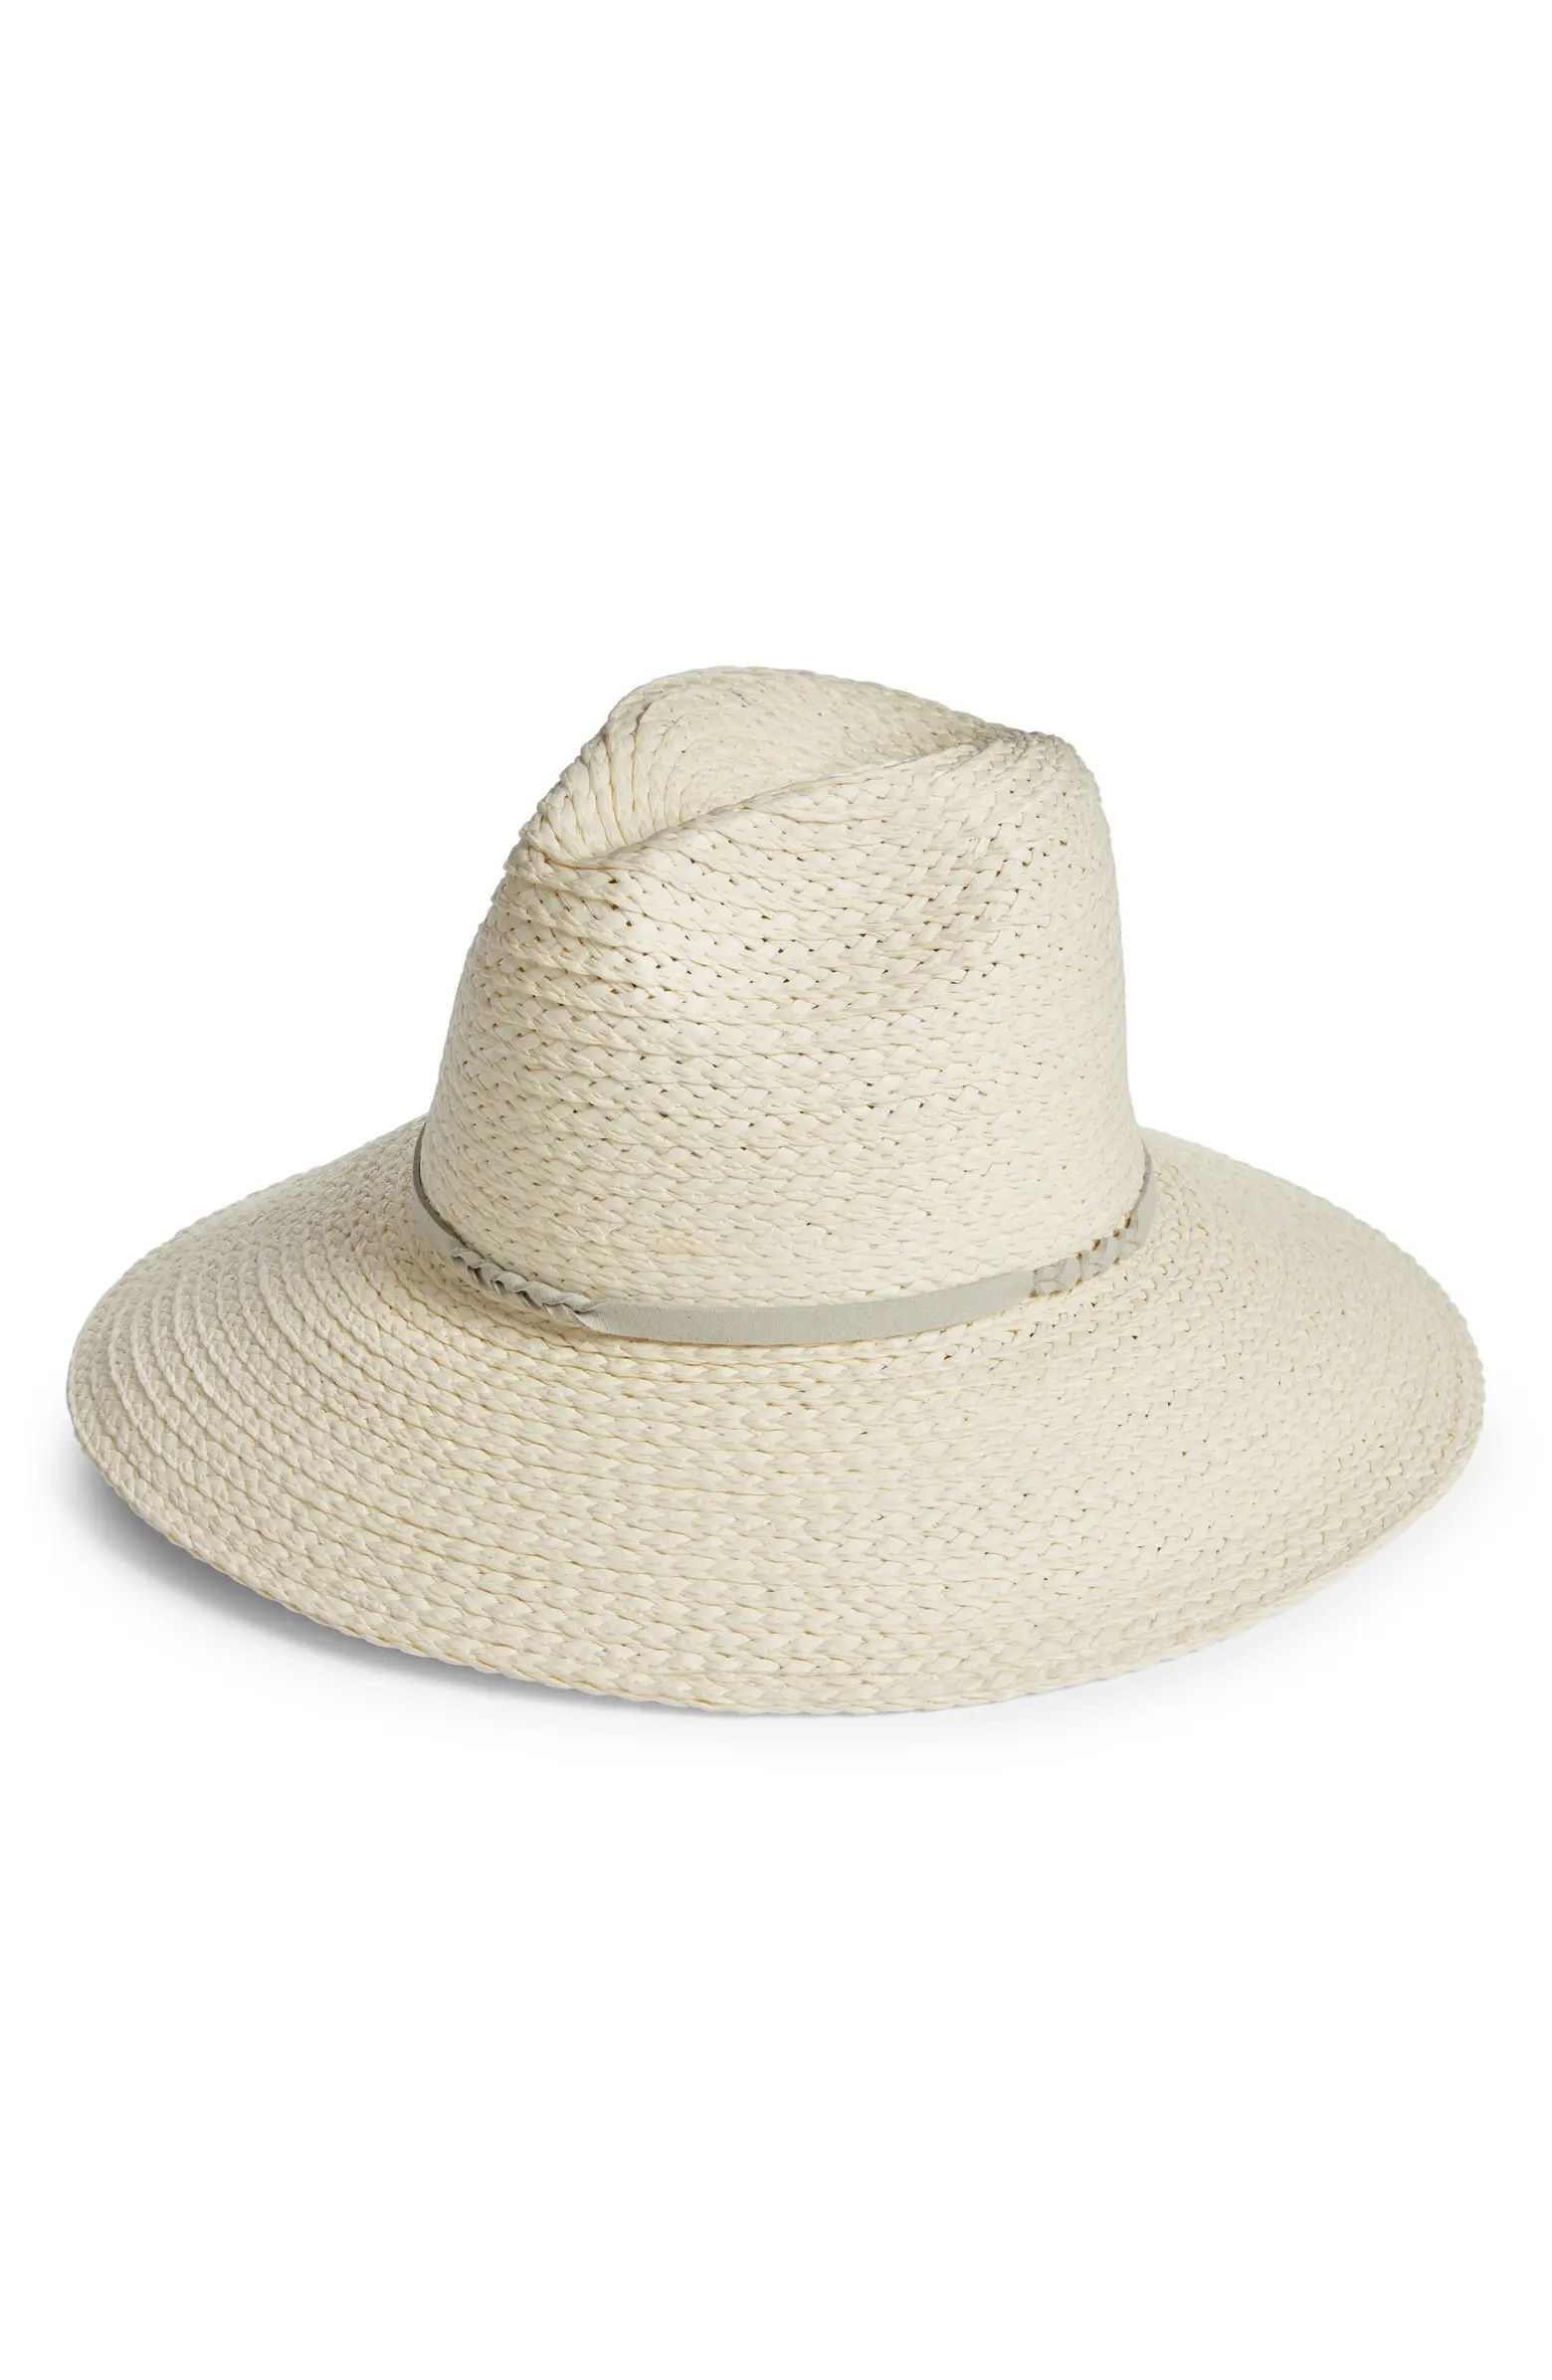 Relaxed Braided Paper Straw Panama Hat | Nordstrom